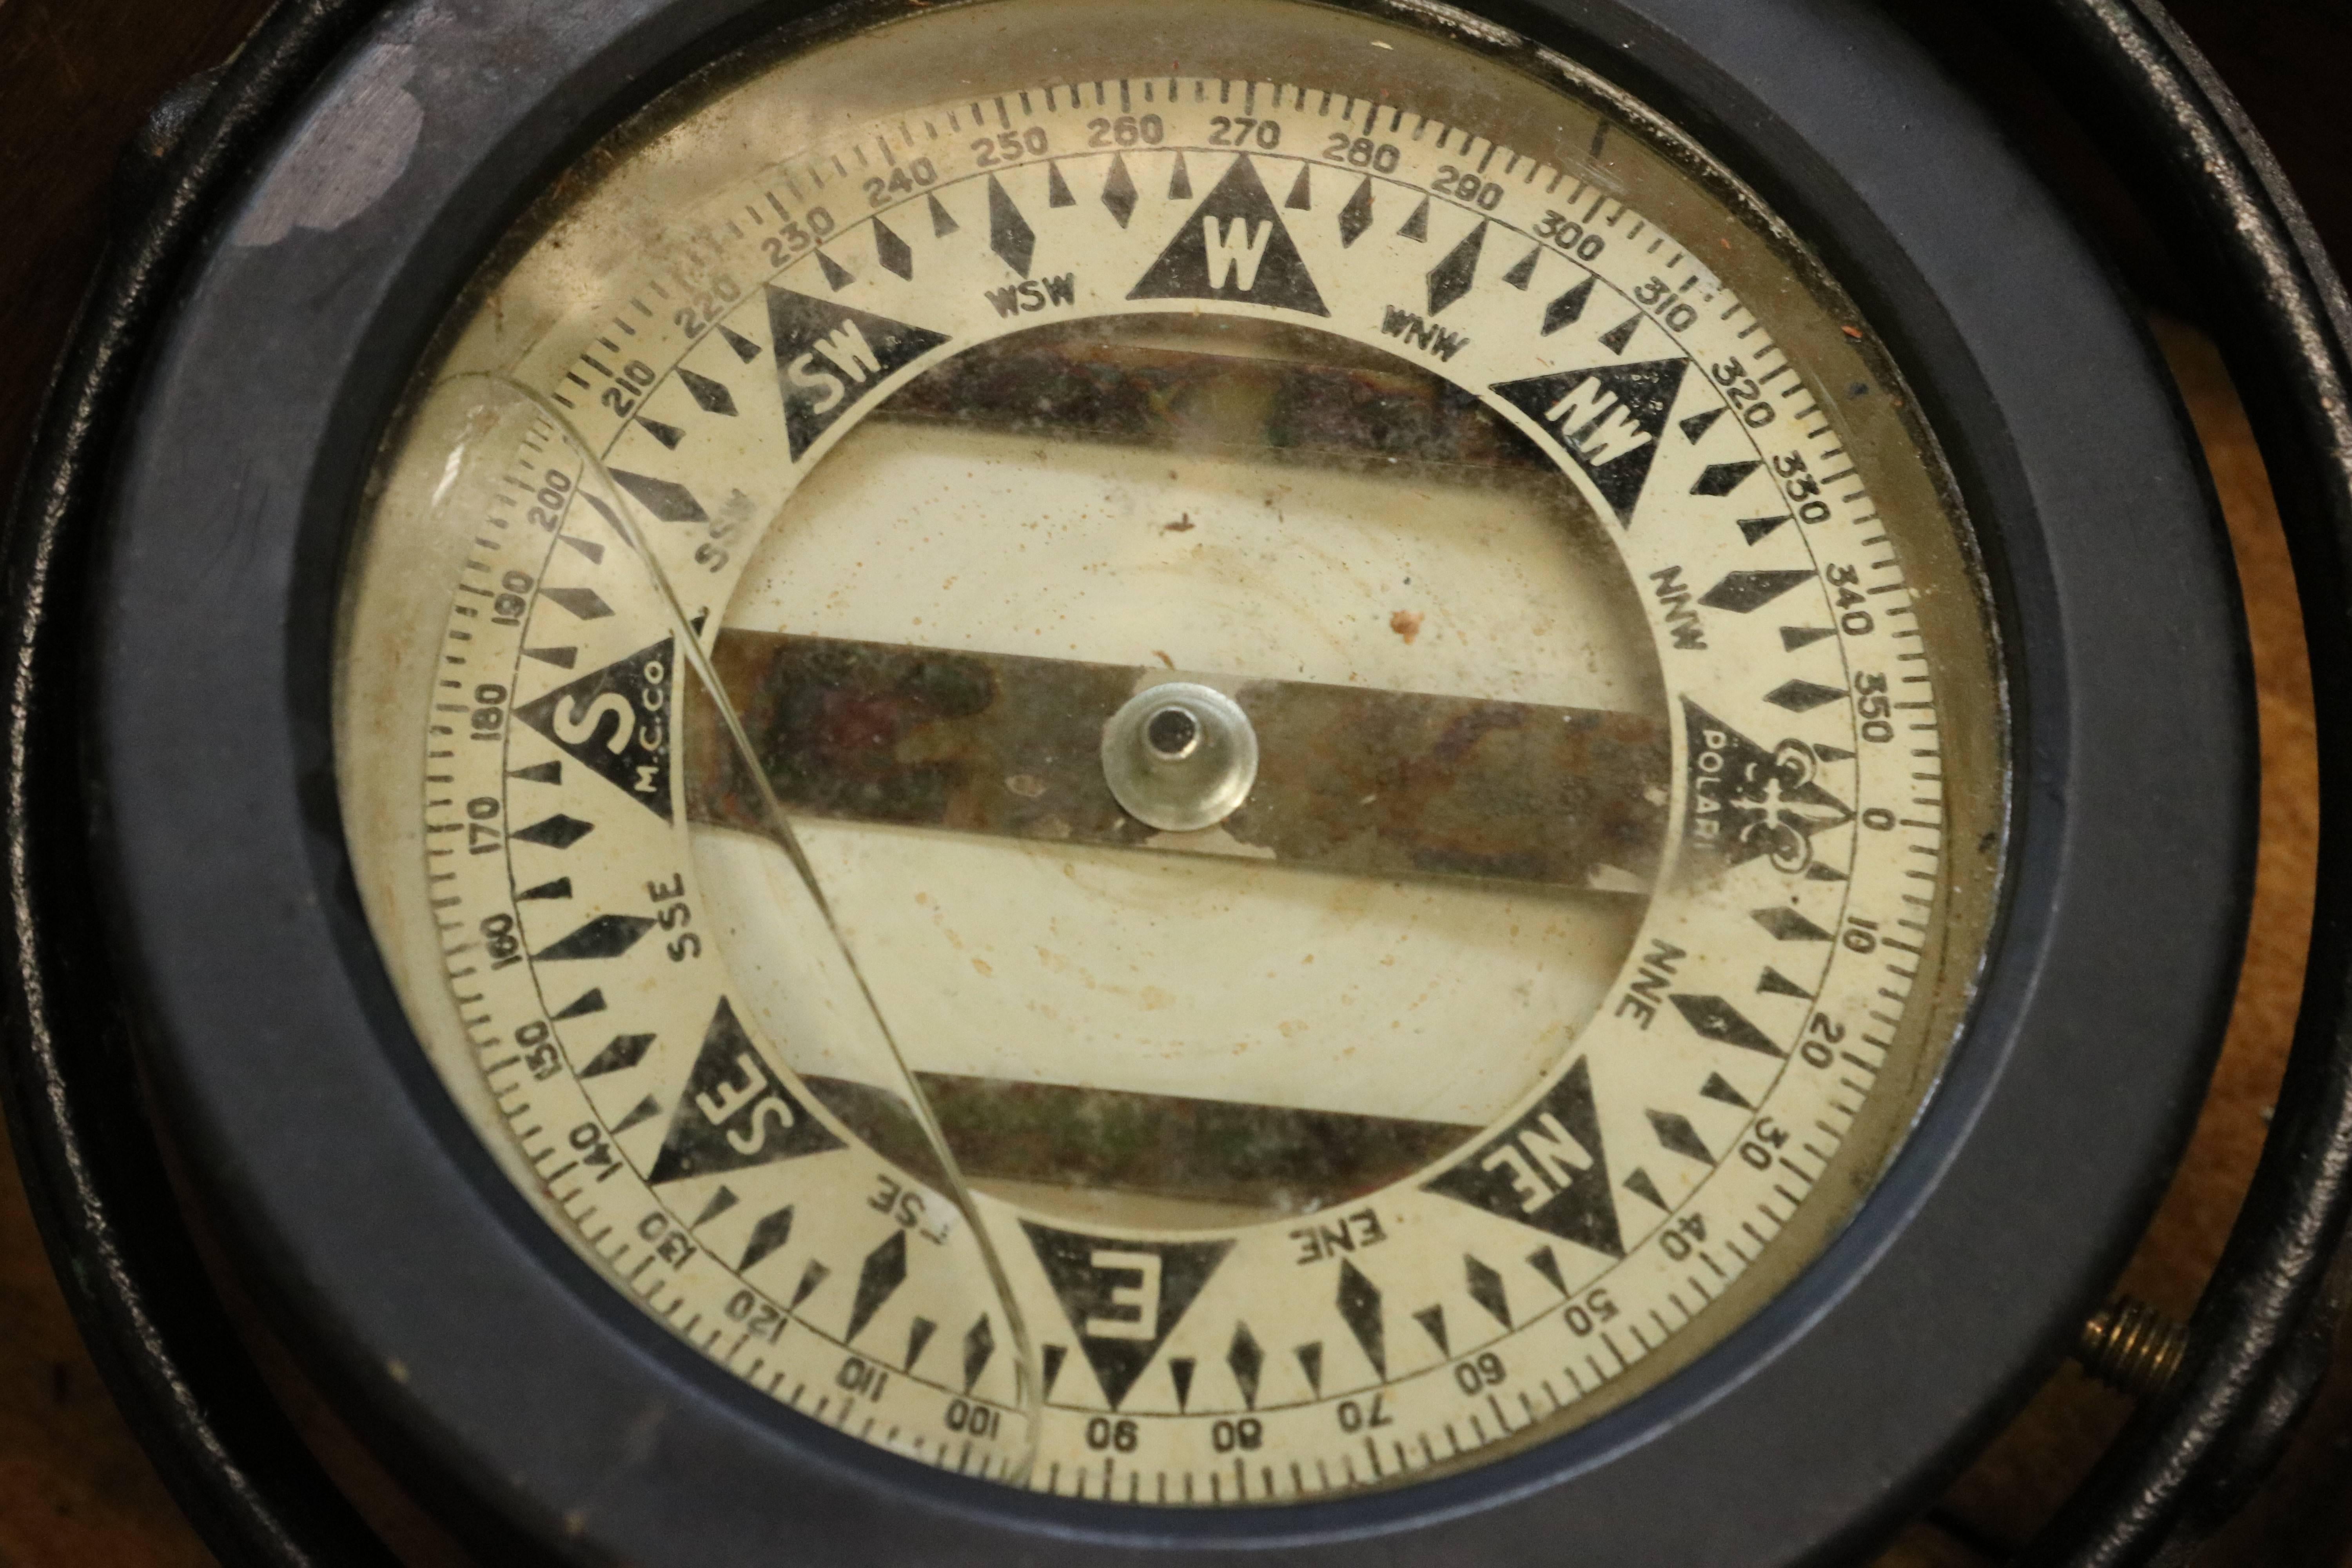 Early polaris compass, liquid filled compass card fitted to a timber box with lid. Lid has crack. Prismatic viewing lens. Dimensions: 6" L x 6" W x 3 1/2" H.